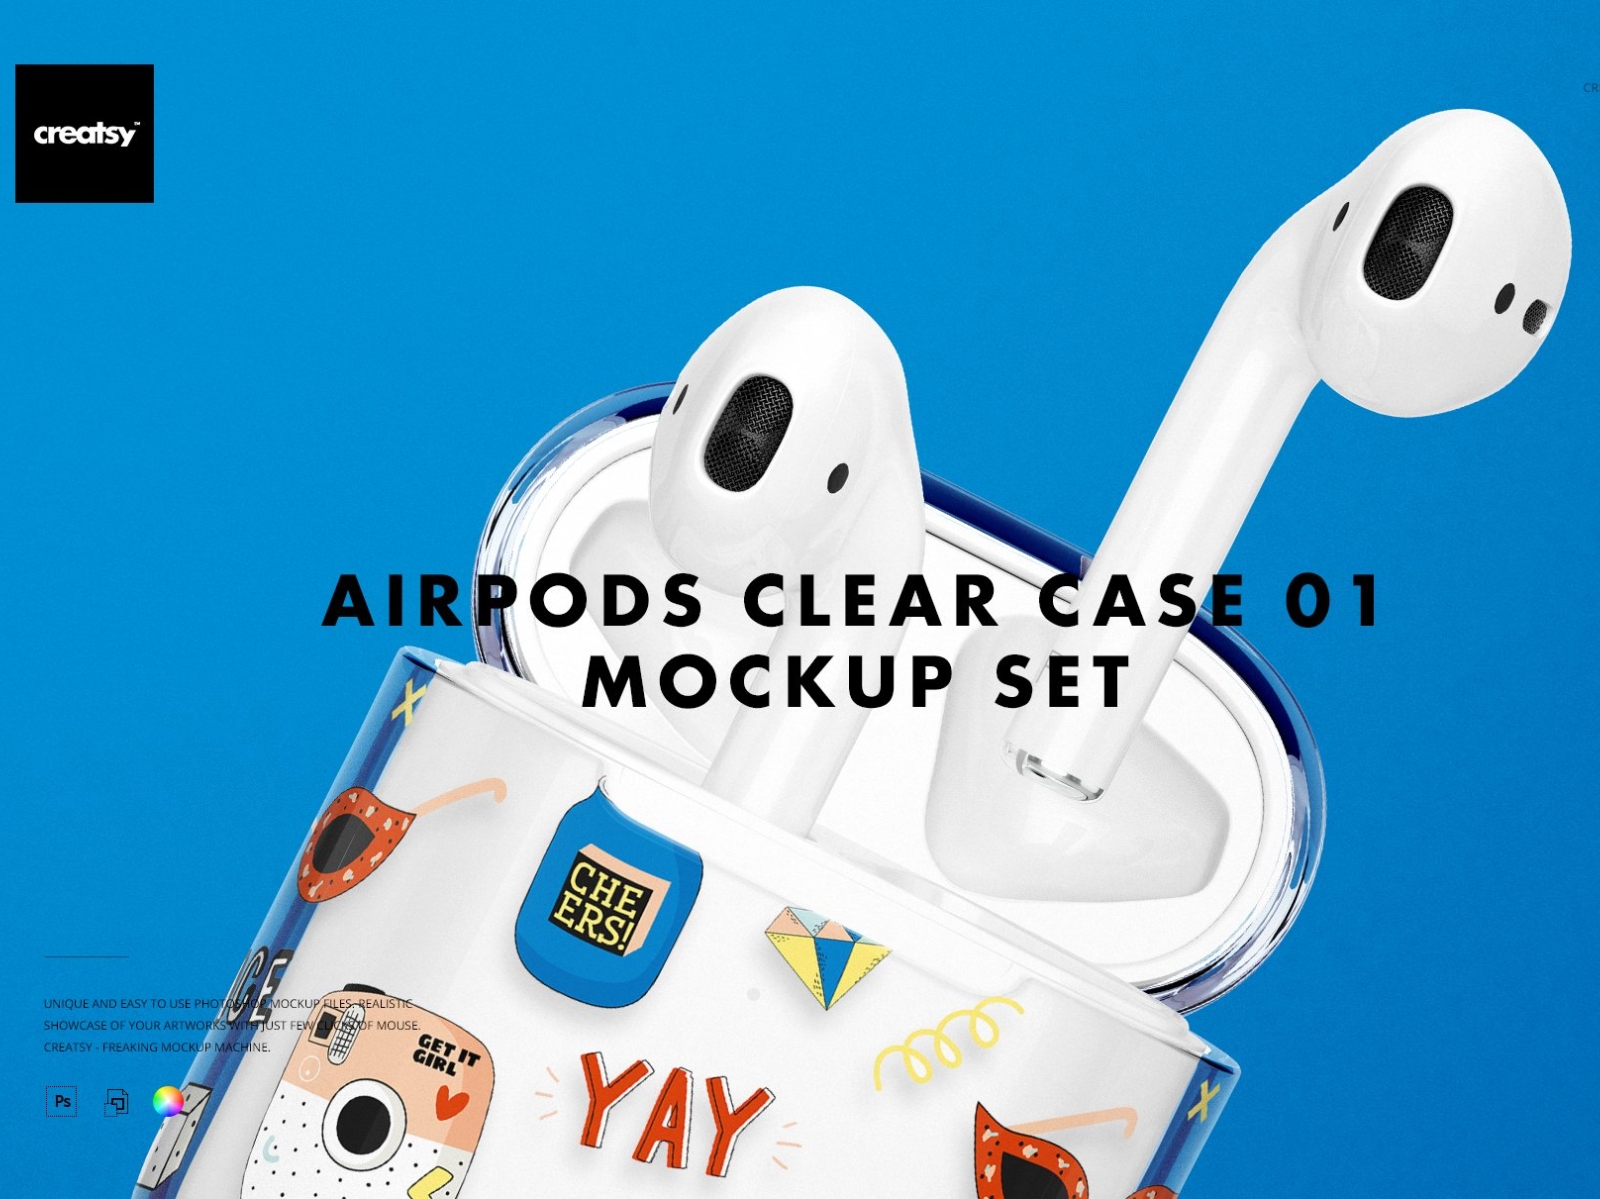 AirPods Clear Case Mockup Set 01 by Mockup5 on Dribbble